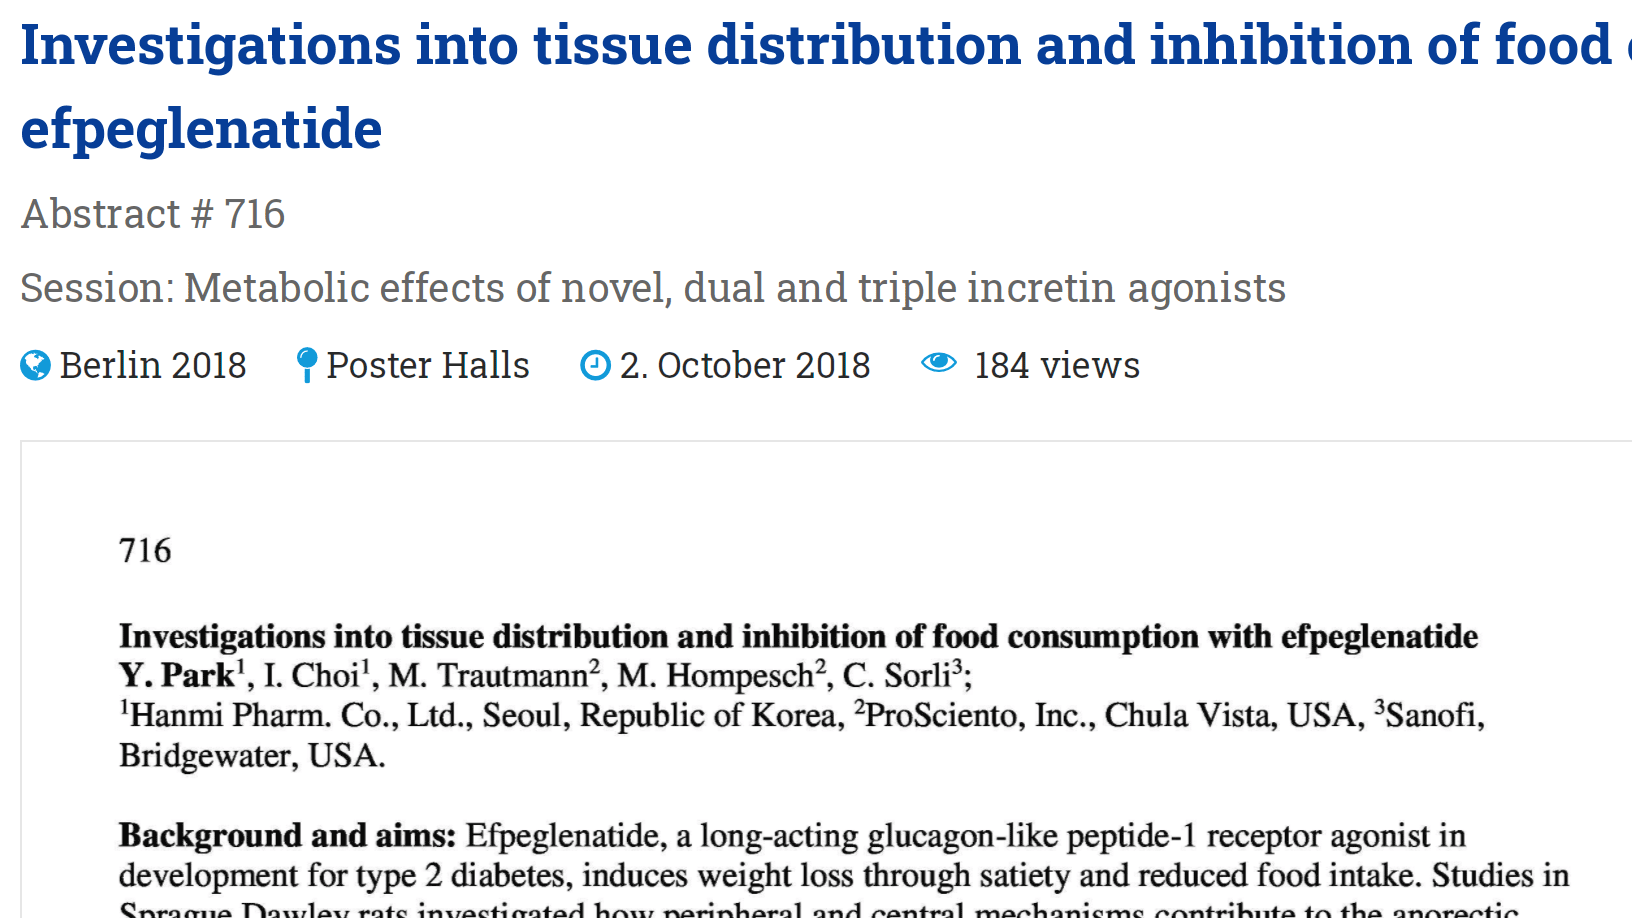 Investigations into Tissue Distribution and Inhibition of Food Consumption with Efpeglenatide thumbnail